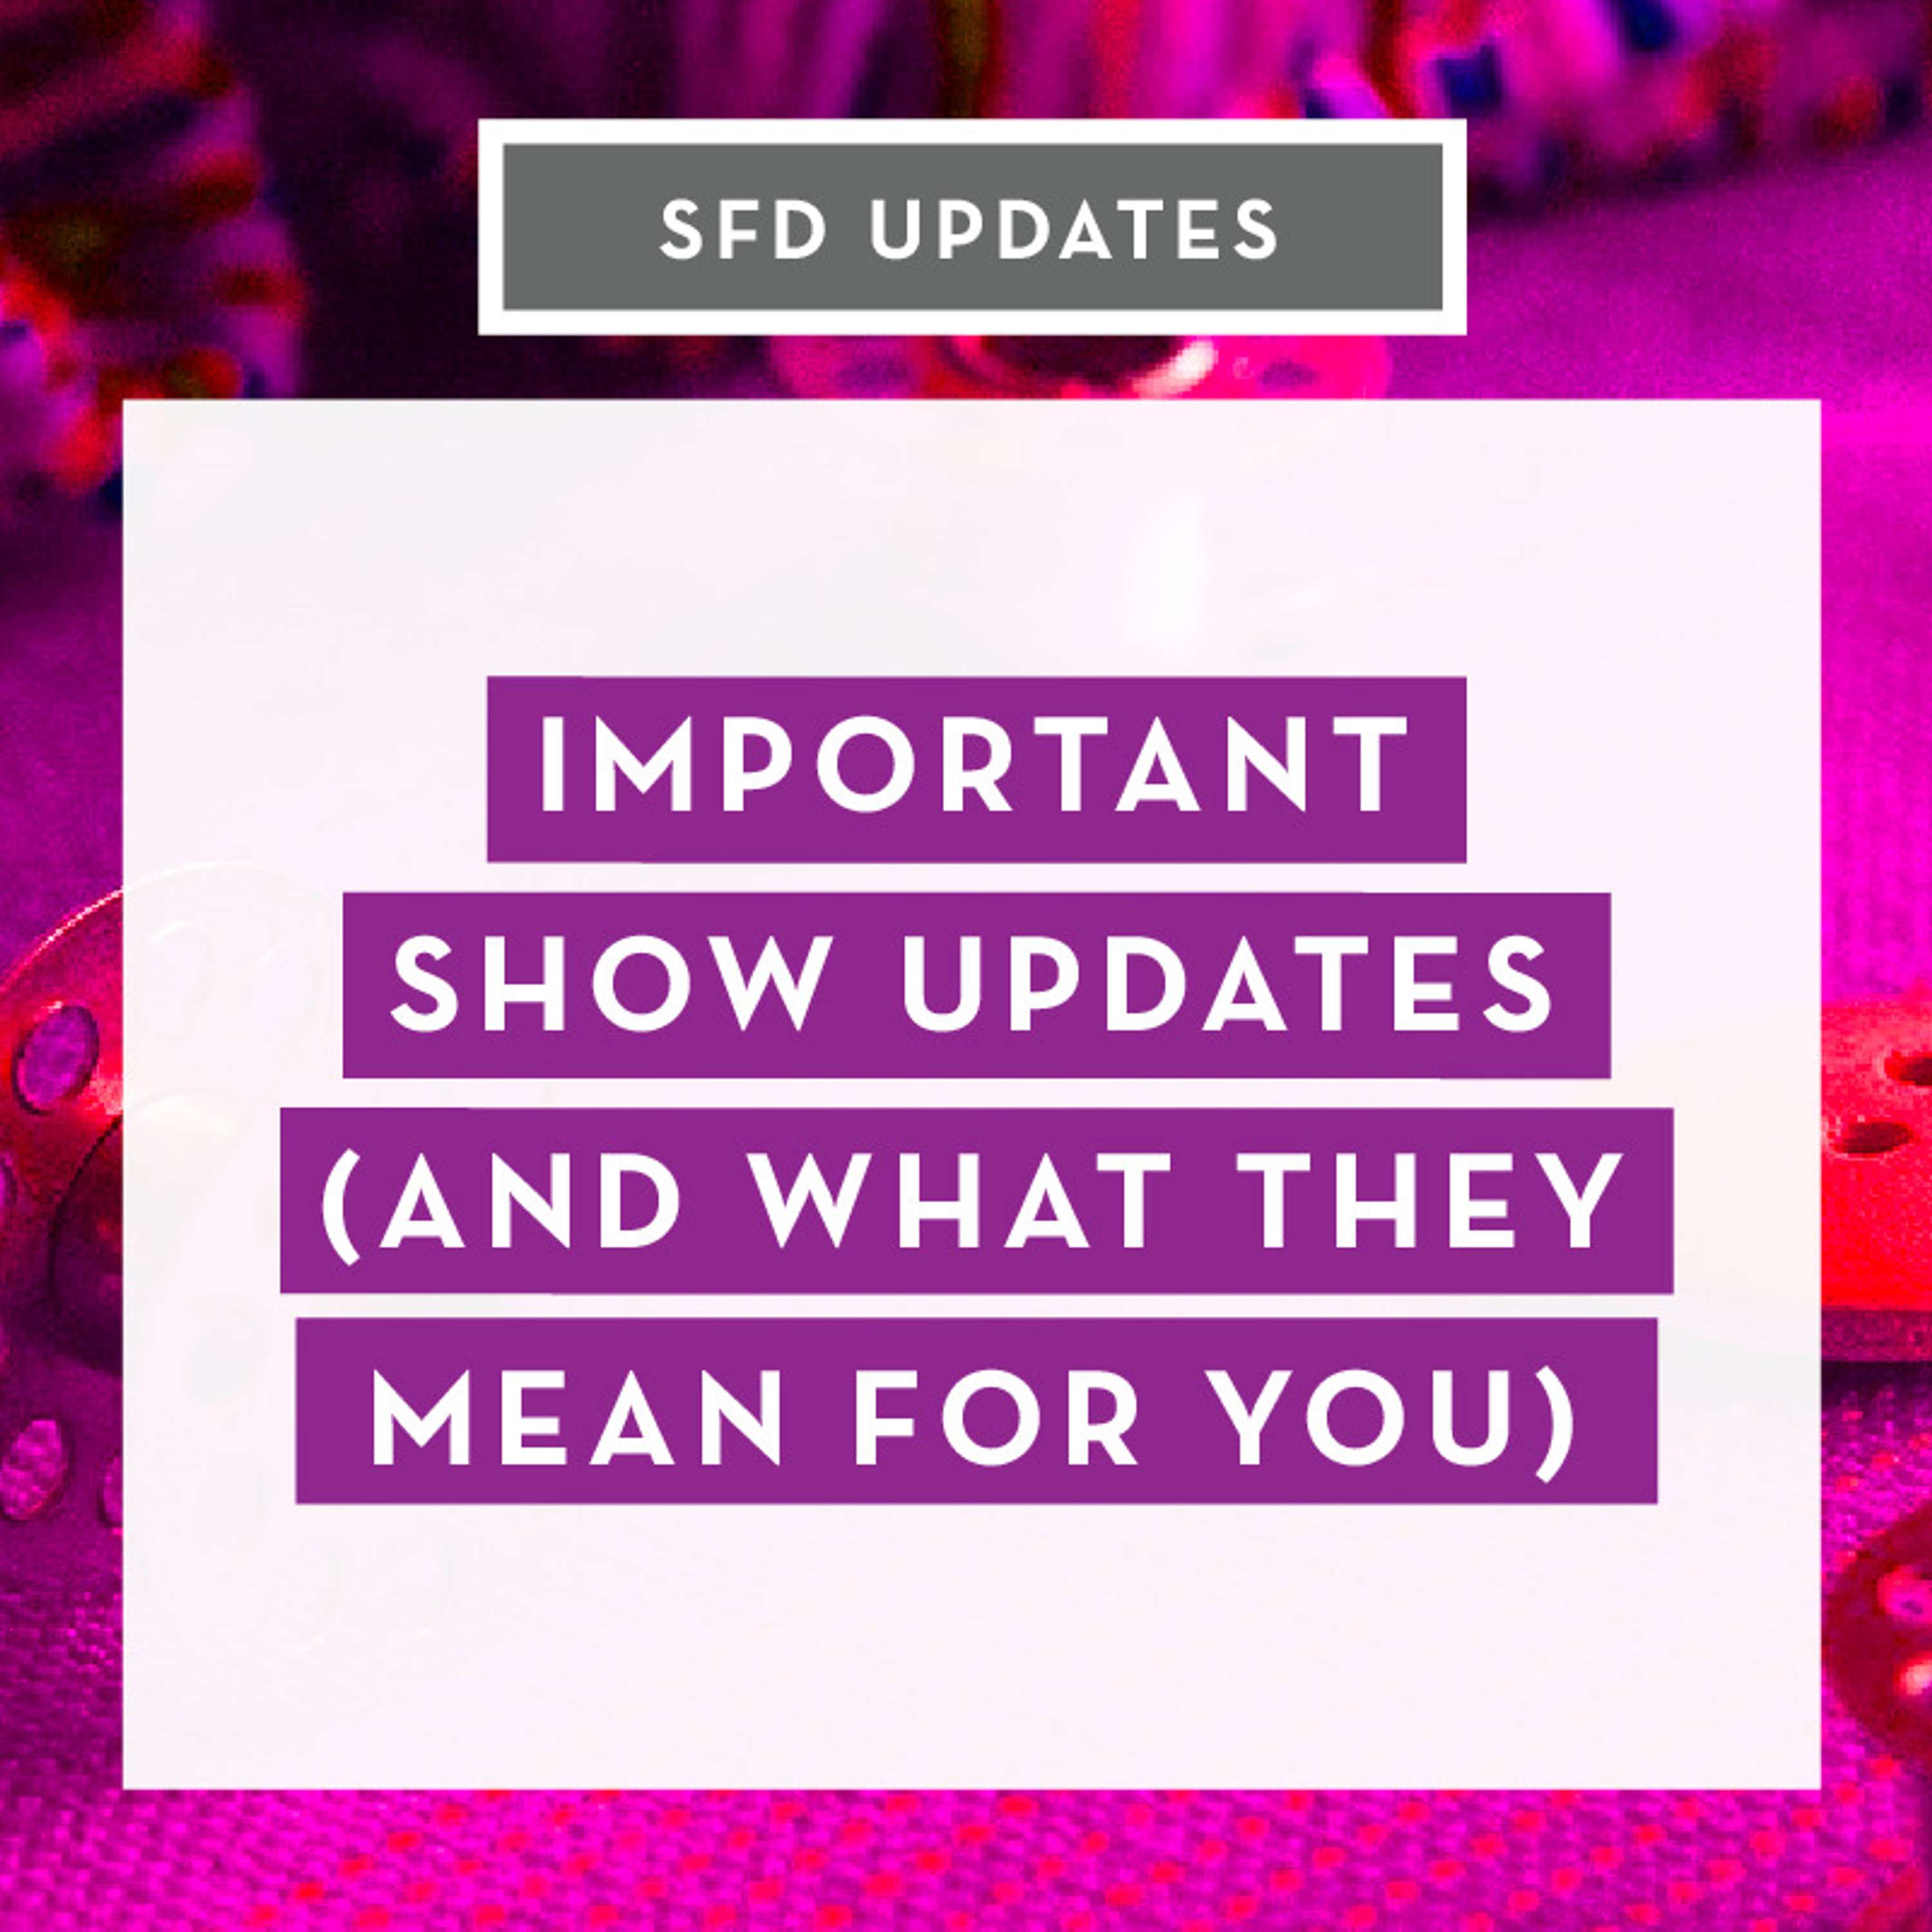 Important Show Updates (and what they mean for you)